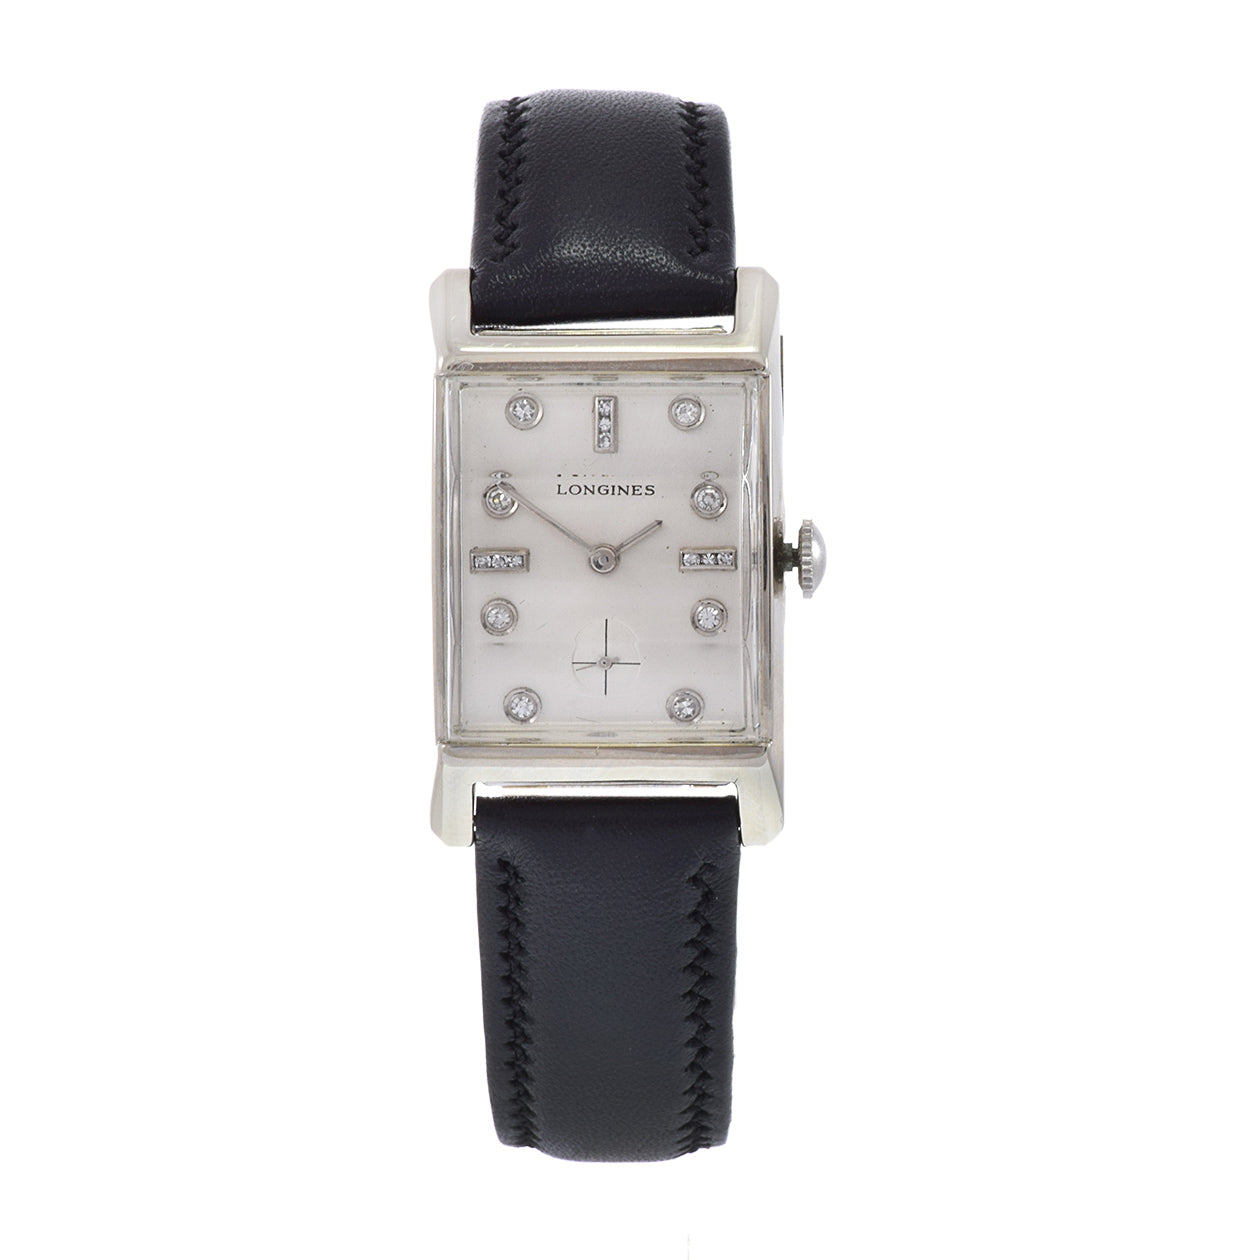 Vintage 1950's Longines 14KT White Gold Diamond Dial Watch